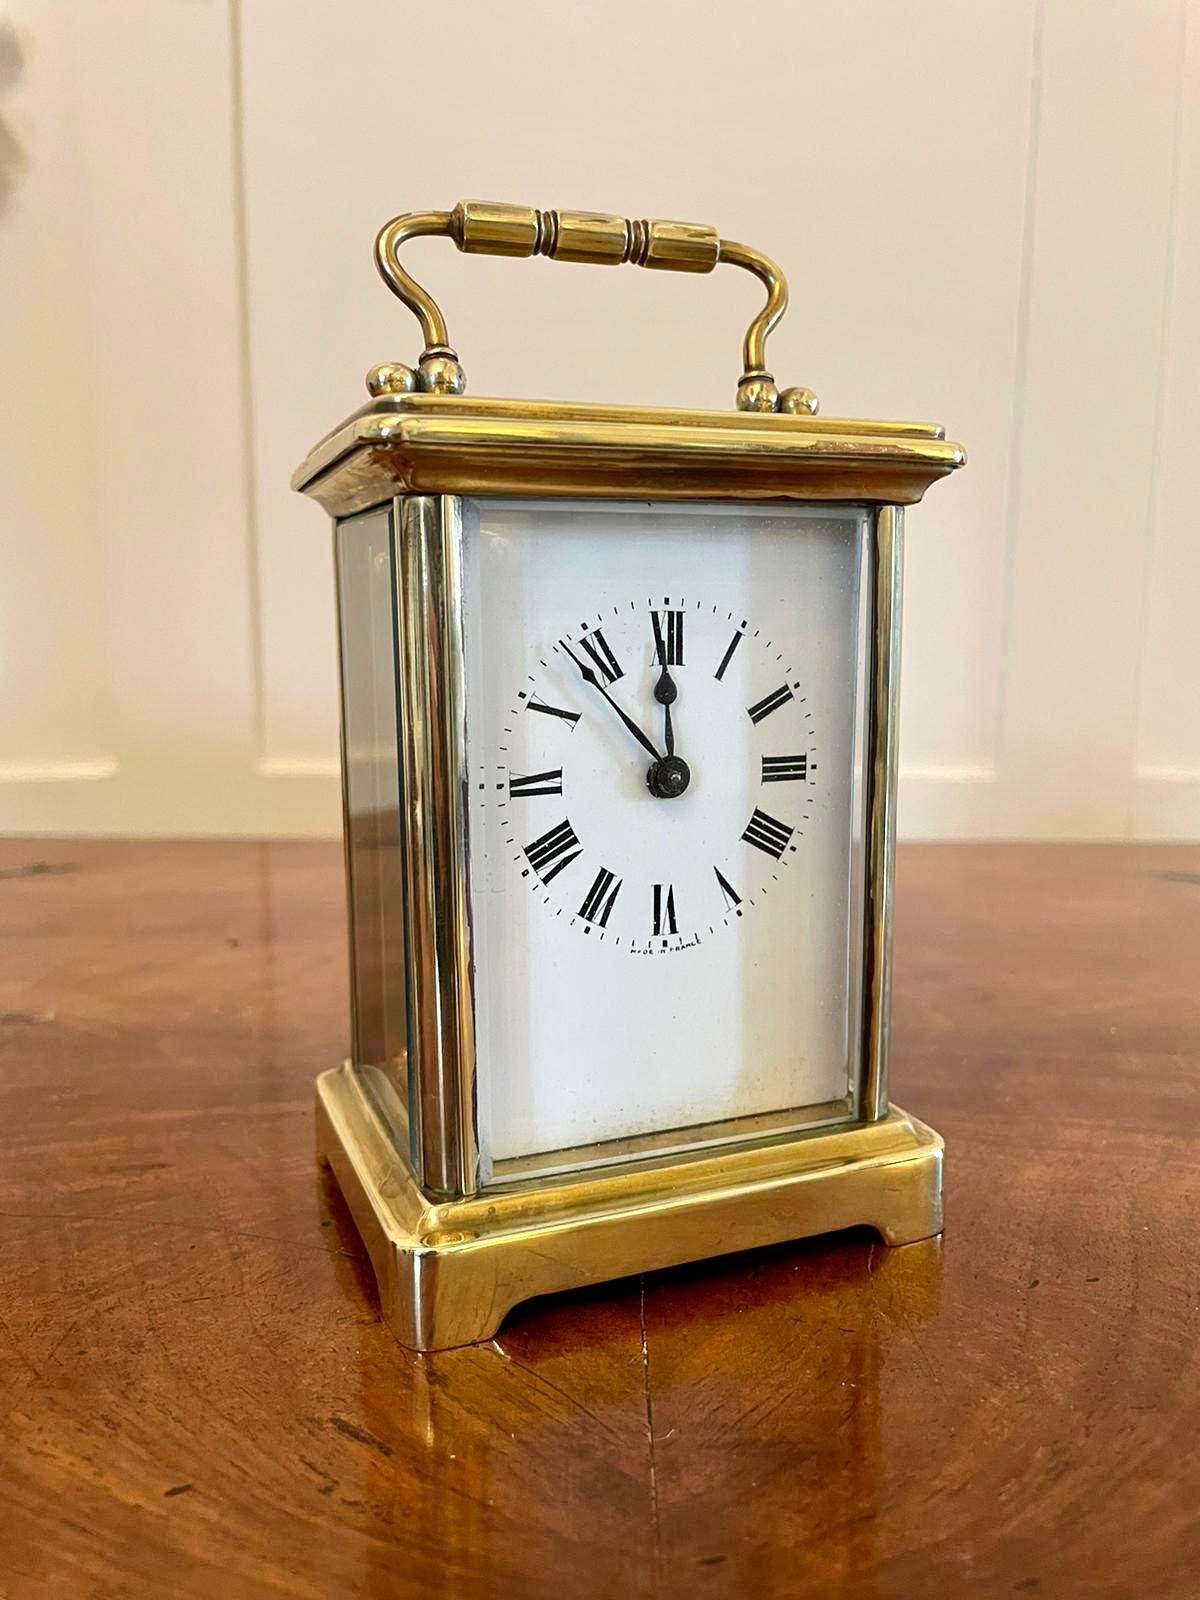 Antique brass carriage clock having a quality brass case, eight day French movement, enamelled dial with elegant original hands and bevel edged glass. It is in good working order and comes in its own original travelling case with original key.

A